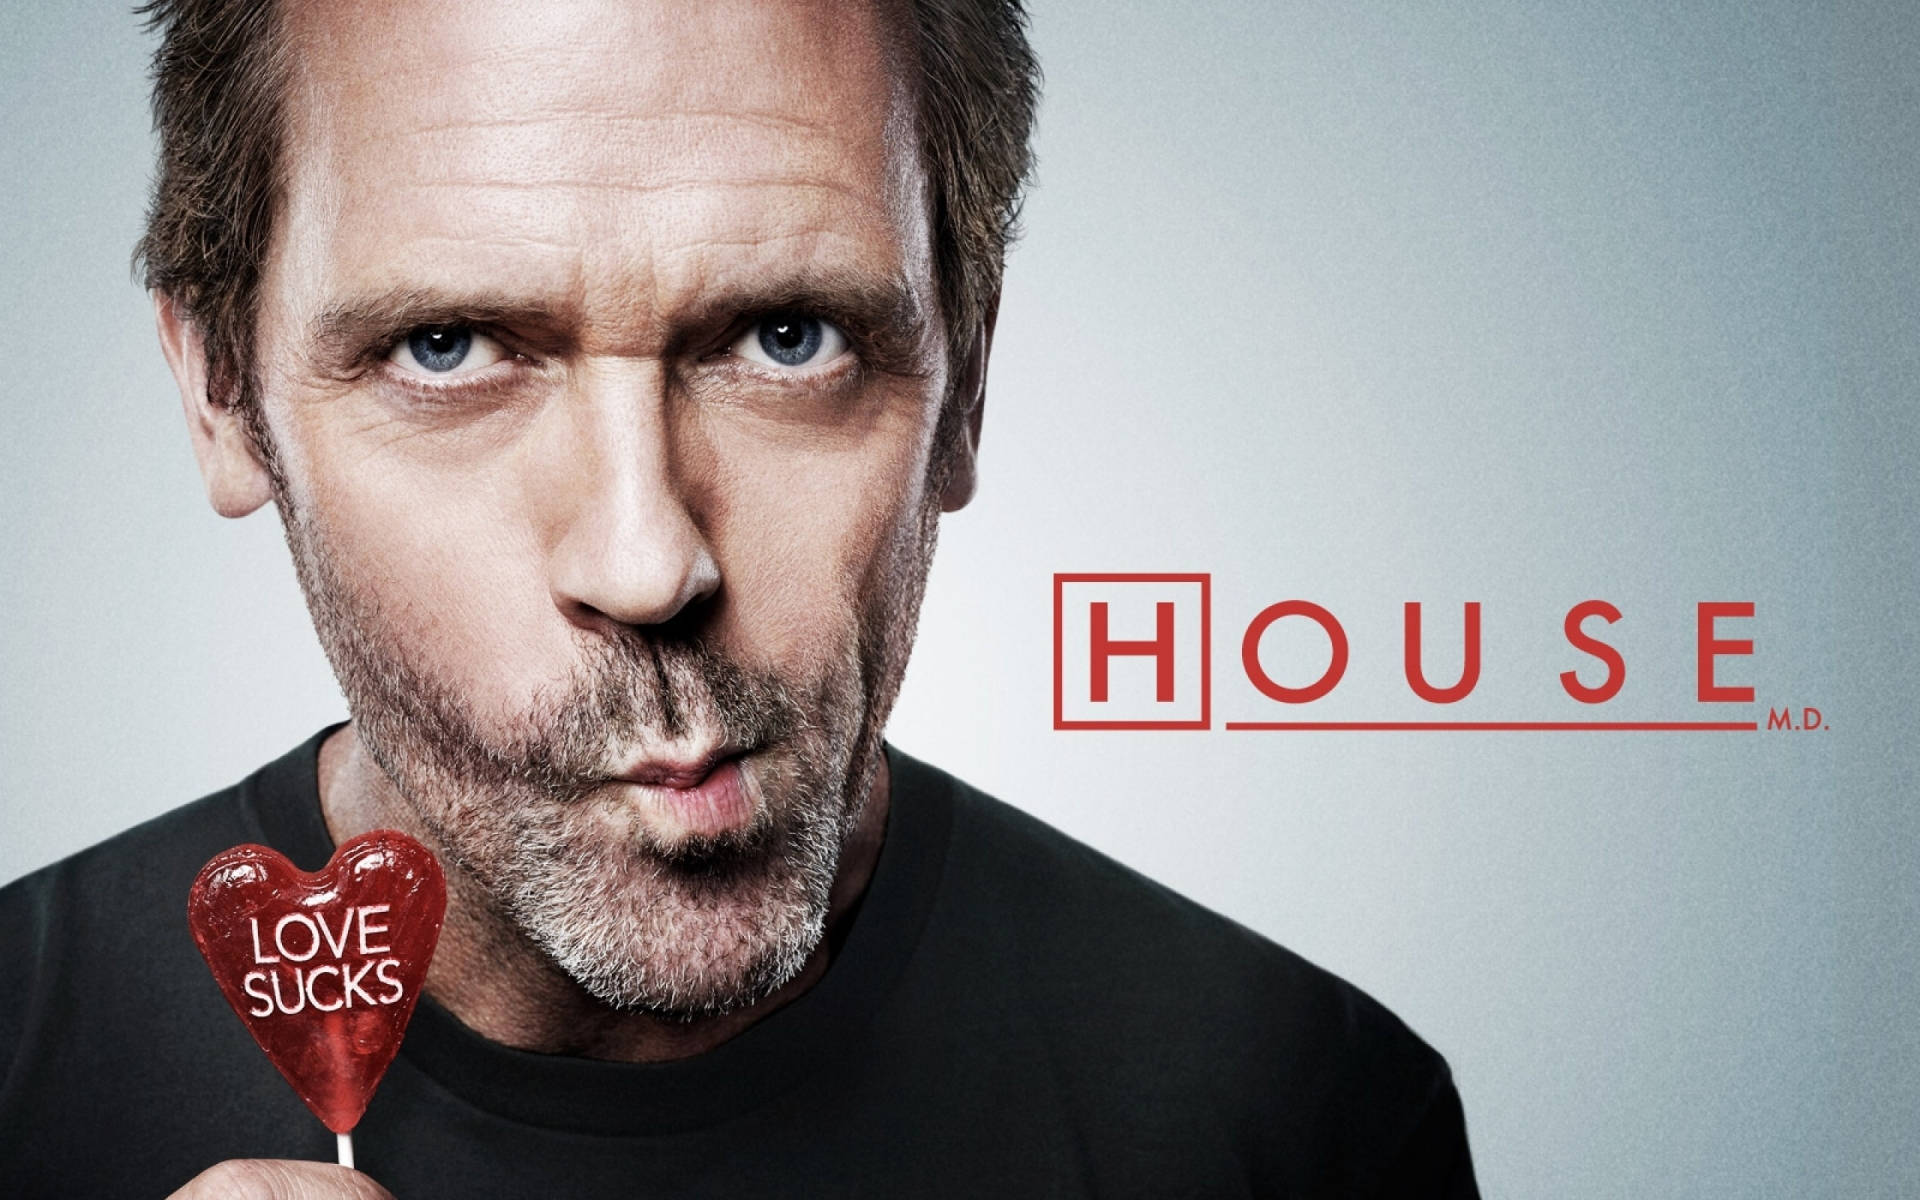 House Md Background Wallpaper